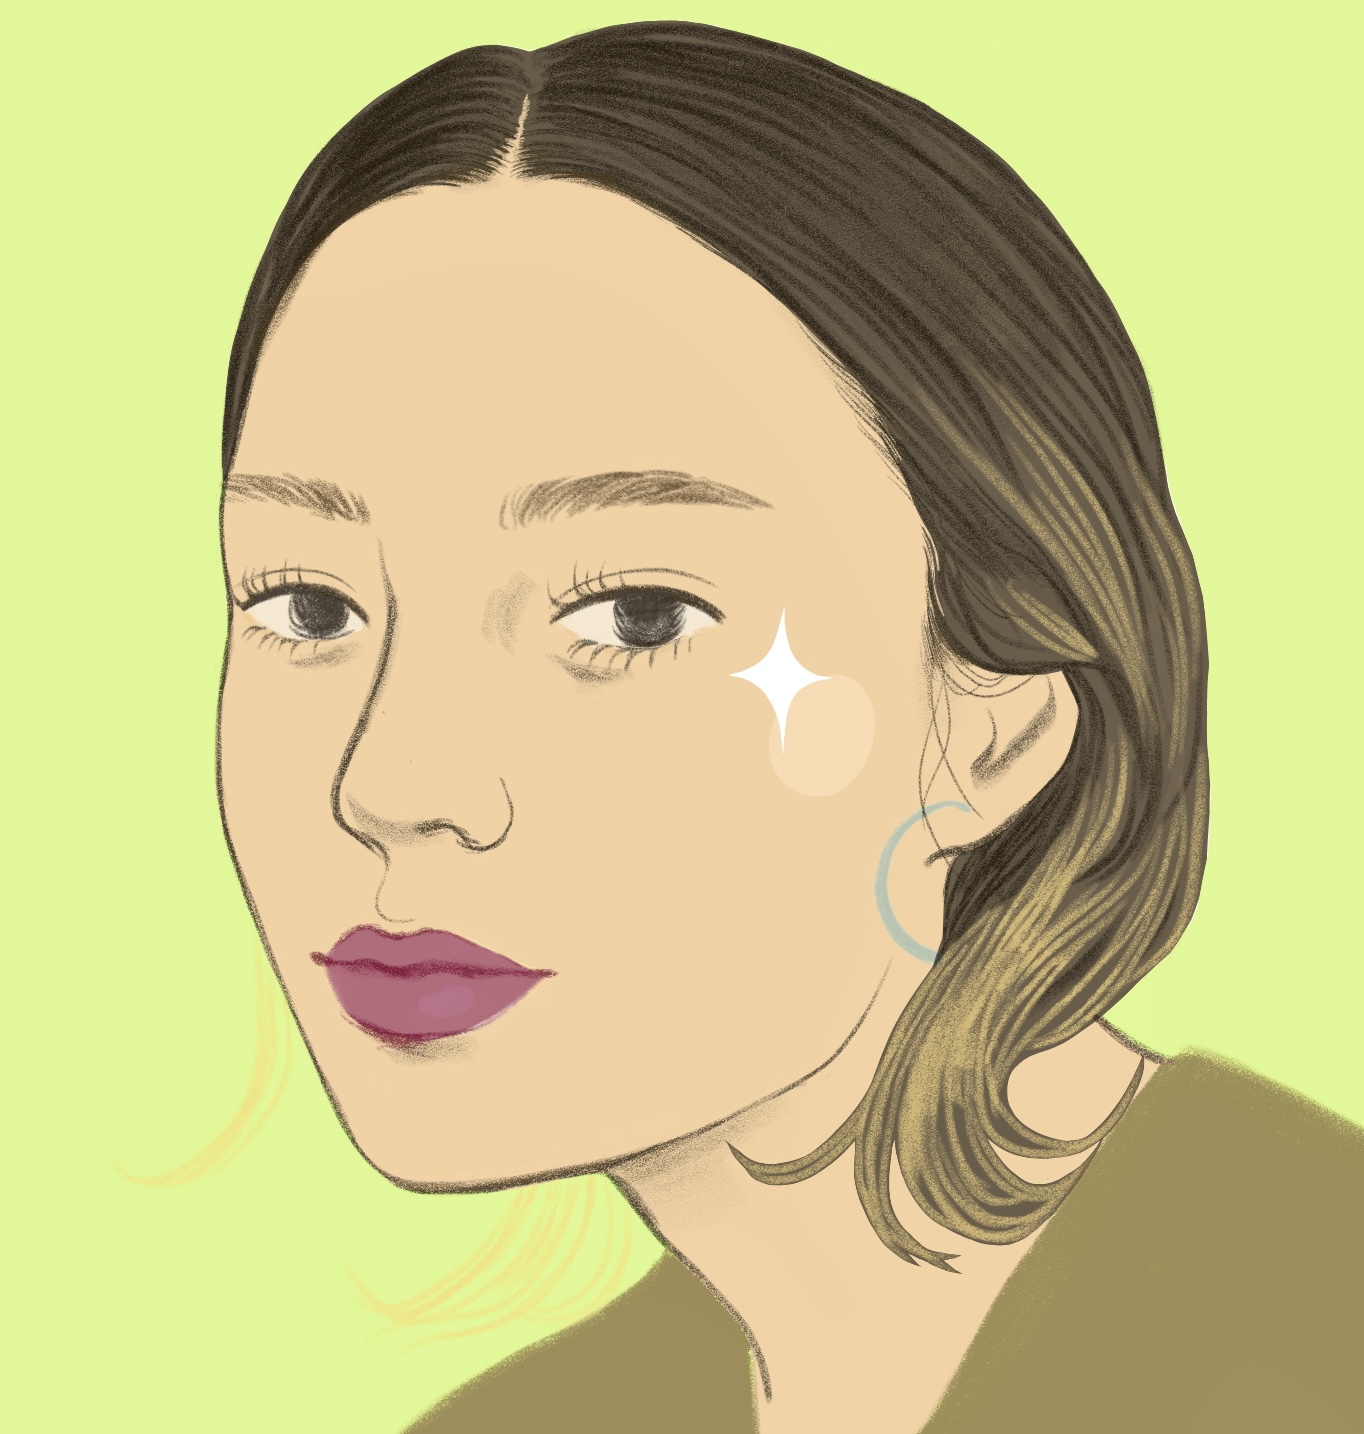 Digital drawing of Valerie against a green background.